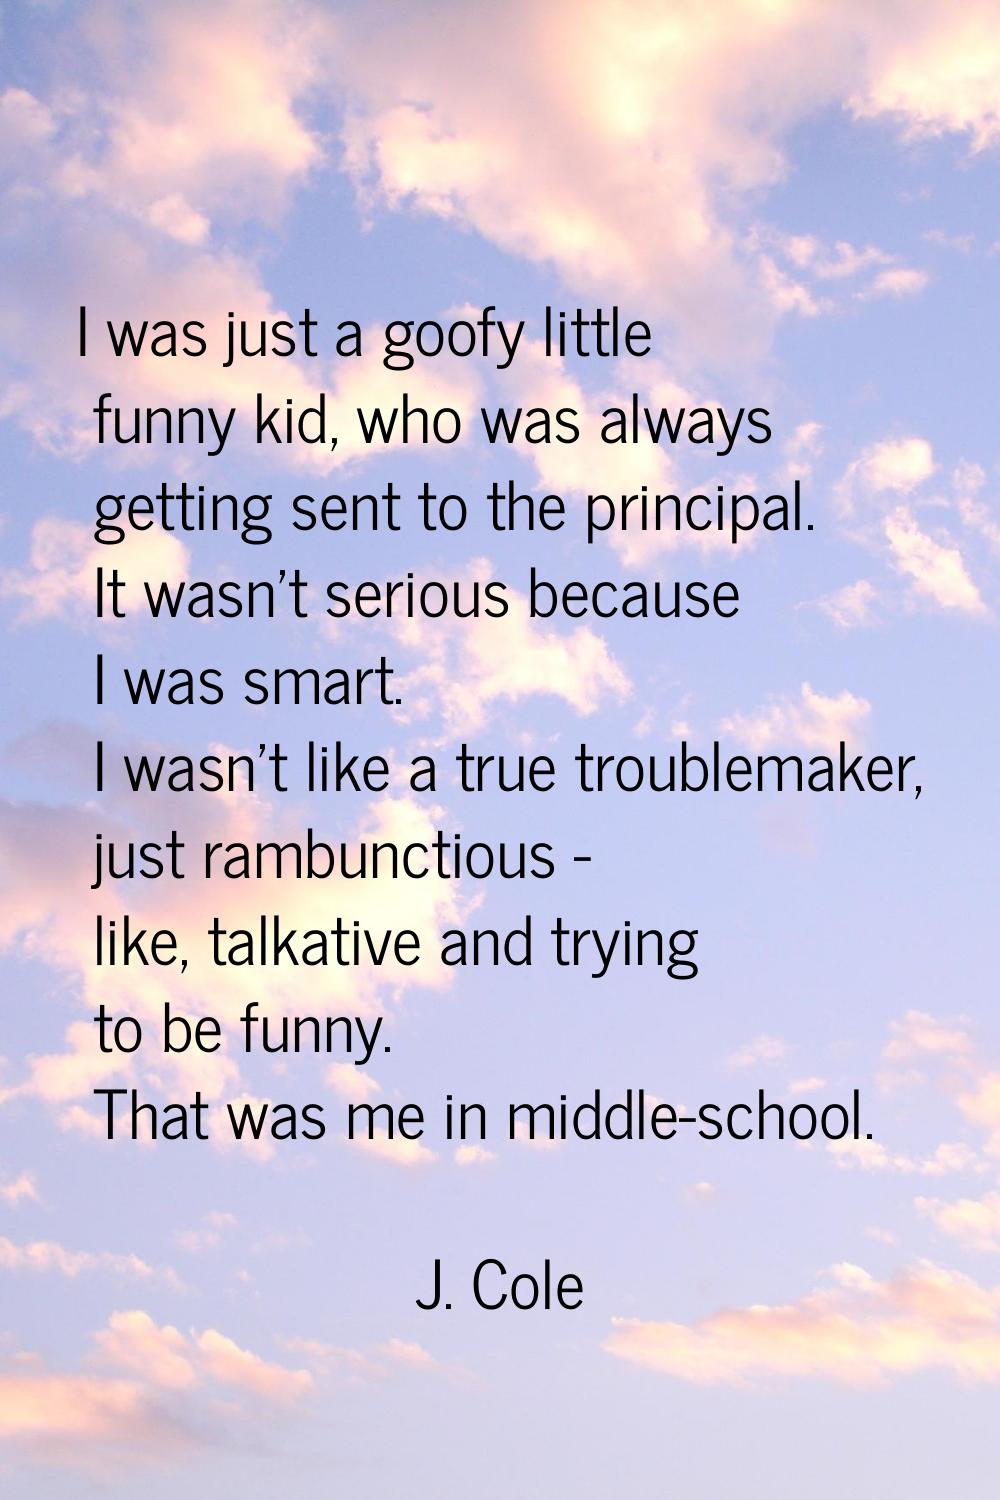 I was just a goofy little funny kid, who was always getting sent to the principal. It wasn't seriou